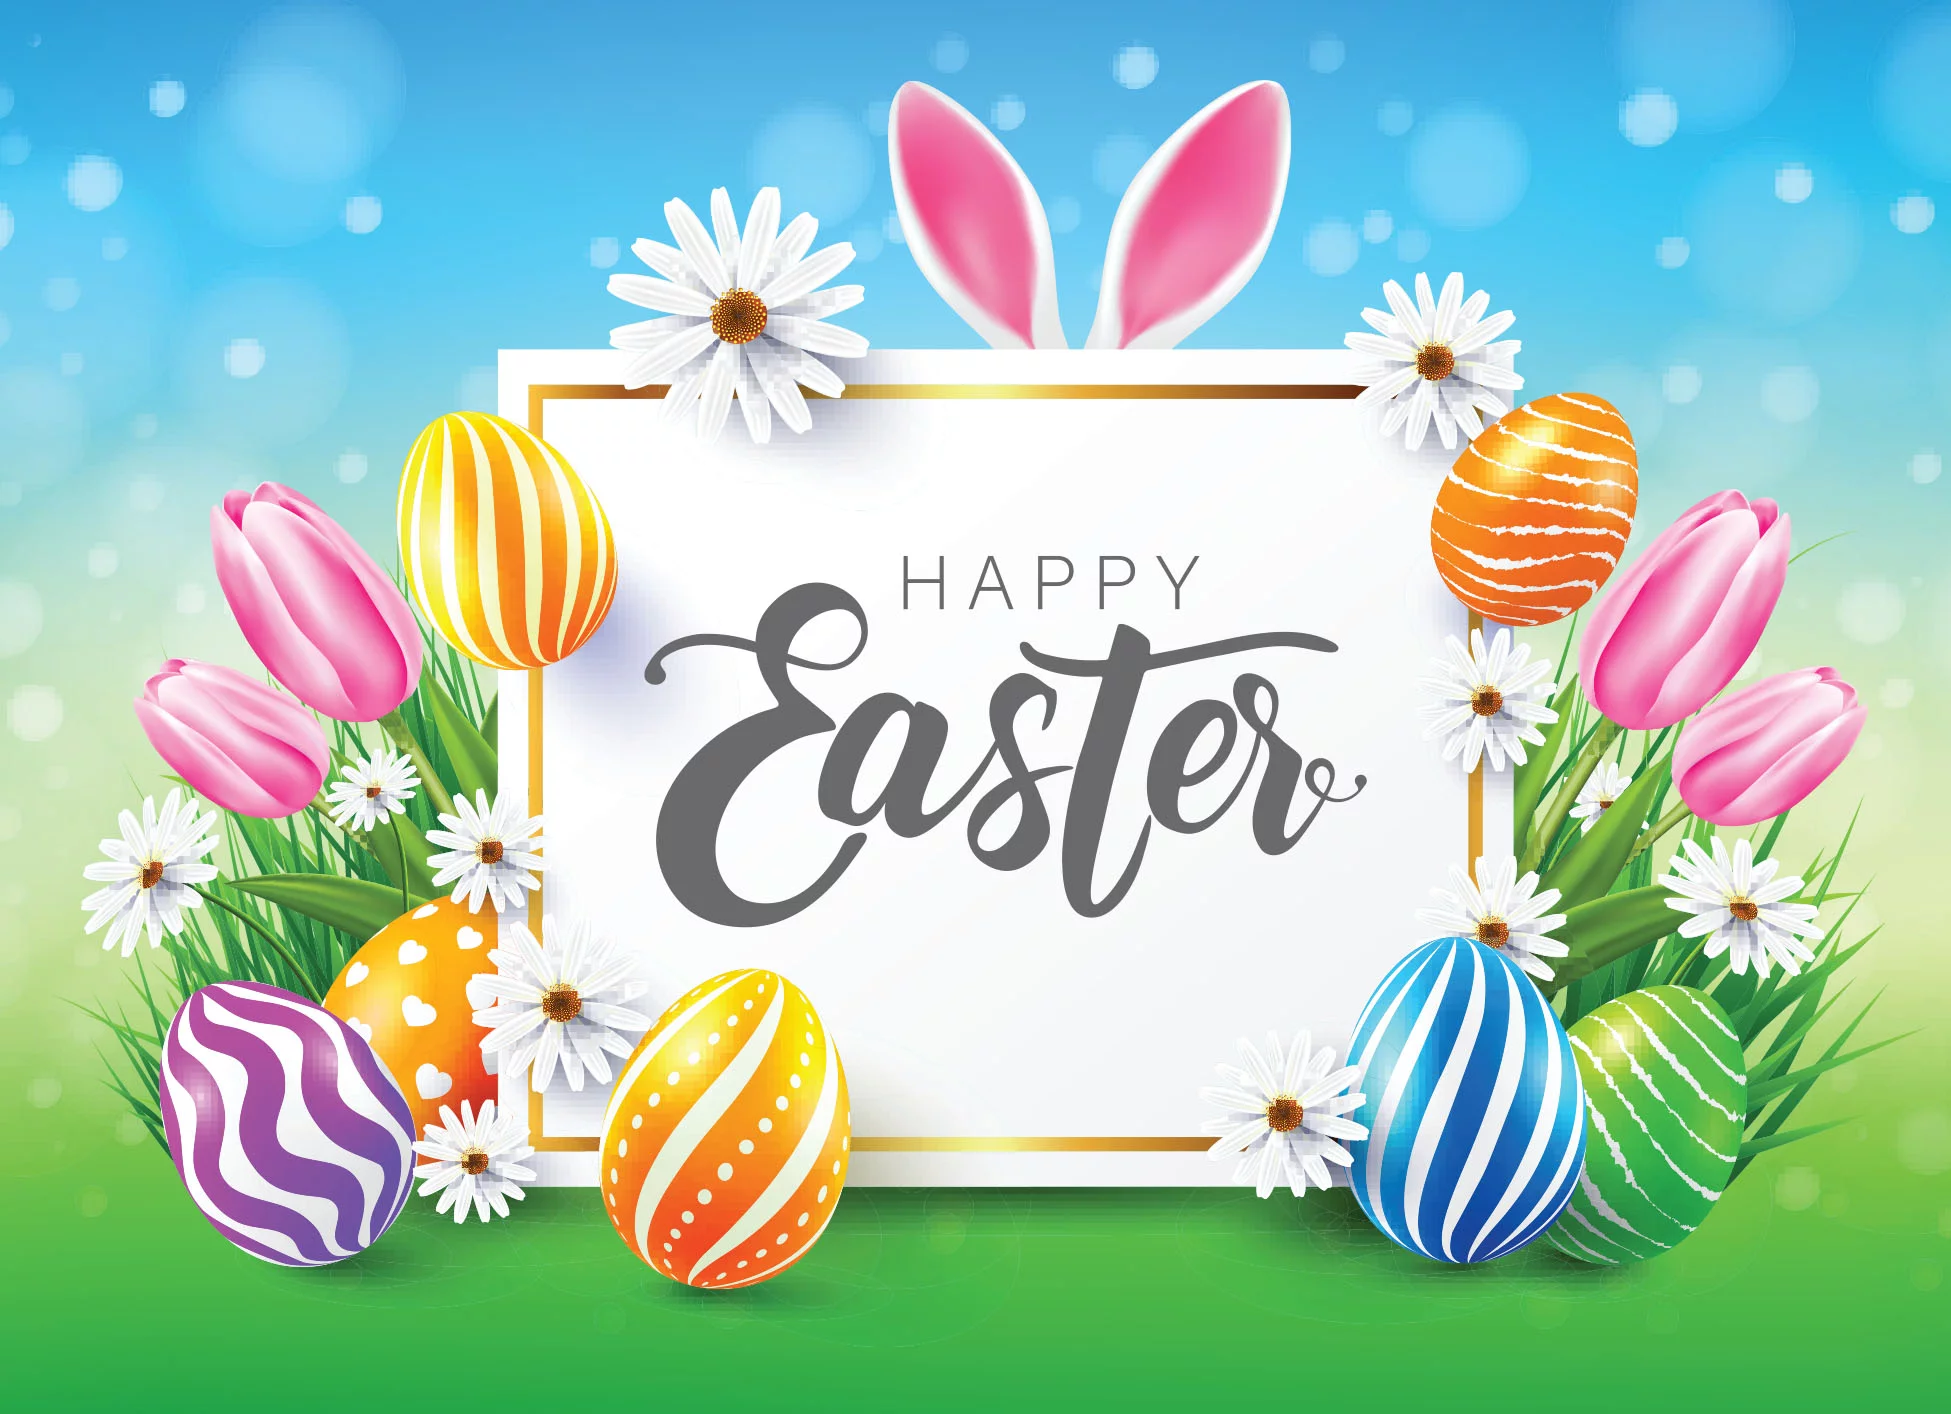 100 Happy Easter Messages, Wishes, Prayers To Send To Friends, Family